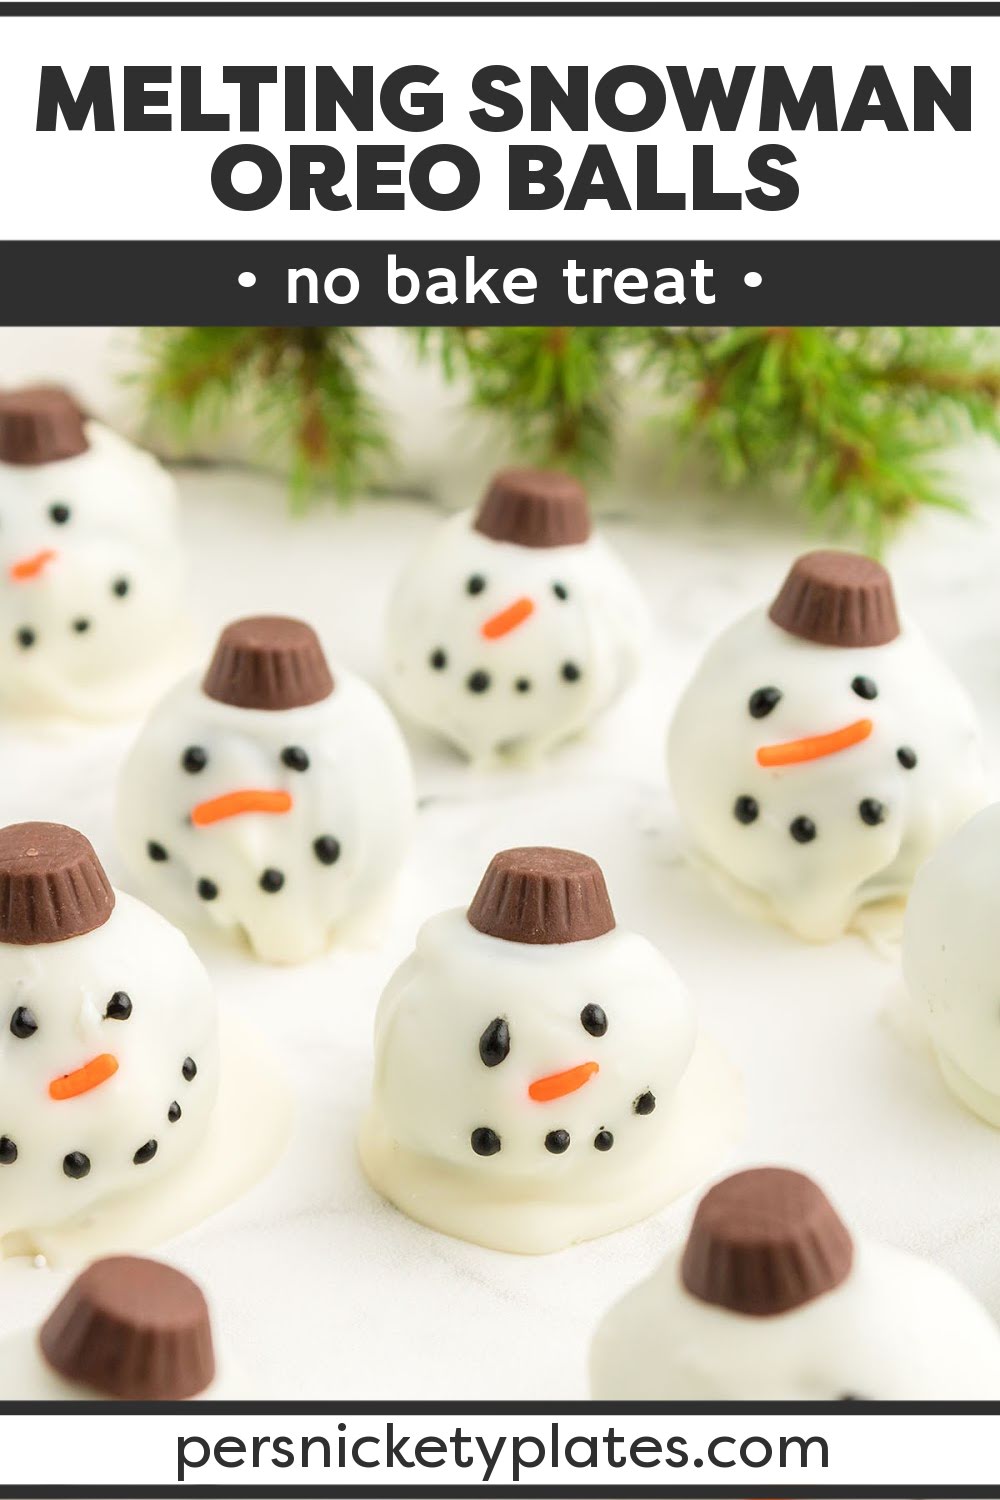 Festive Snowman Oreo balls are impressive, adorable and so much fun to make! With just 5 minutes of prep time and a few simple ingredients, these fudgy no-bake treats are ready to serve in just 30 minutes. They're the perfect addition to any holiday dessert tray! | www.persnicketyplates.com